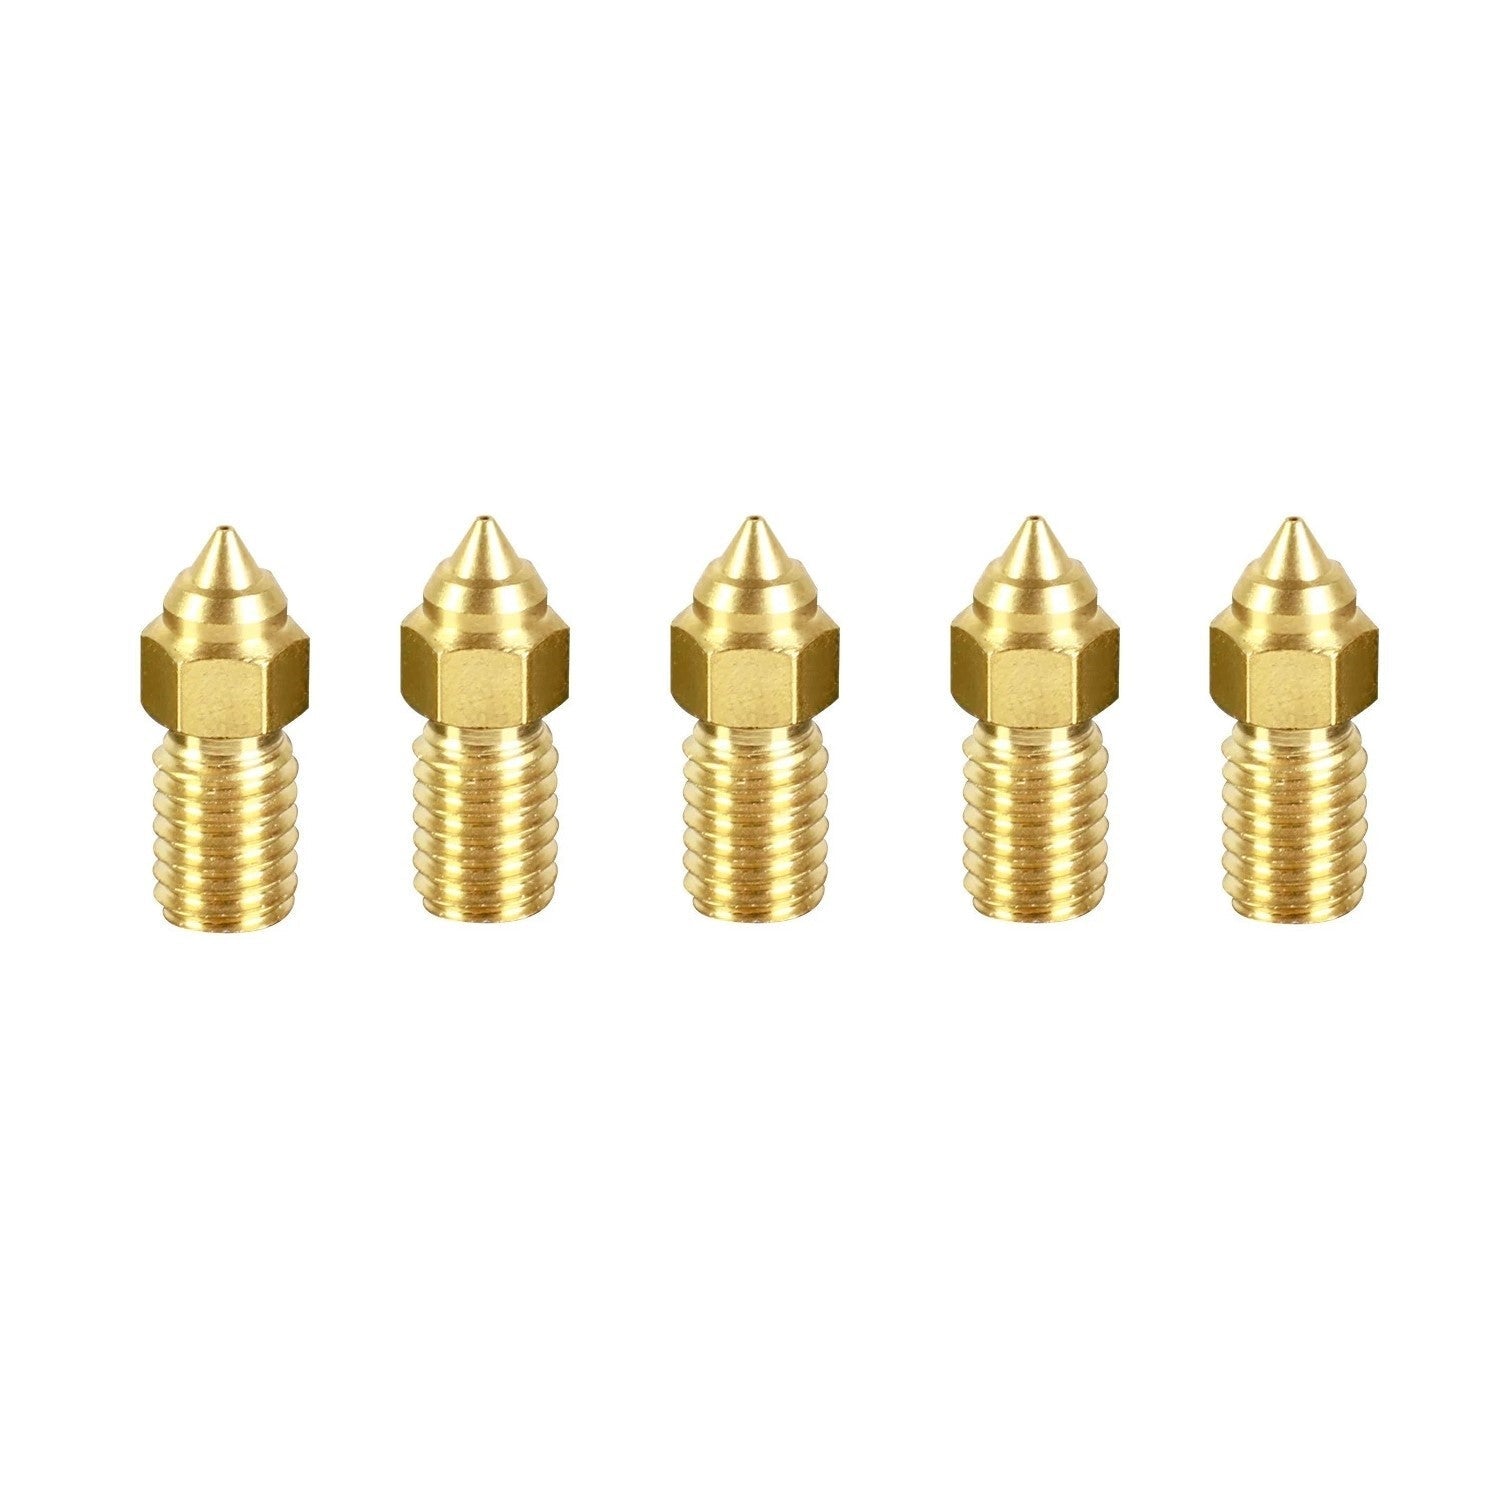 5pc Creality 3D® Ender-7 M6 Extra Long Nozzle (0.4mm)